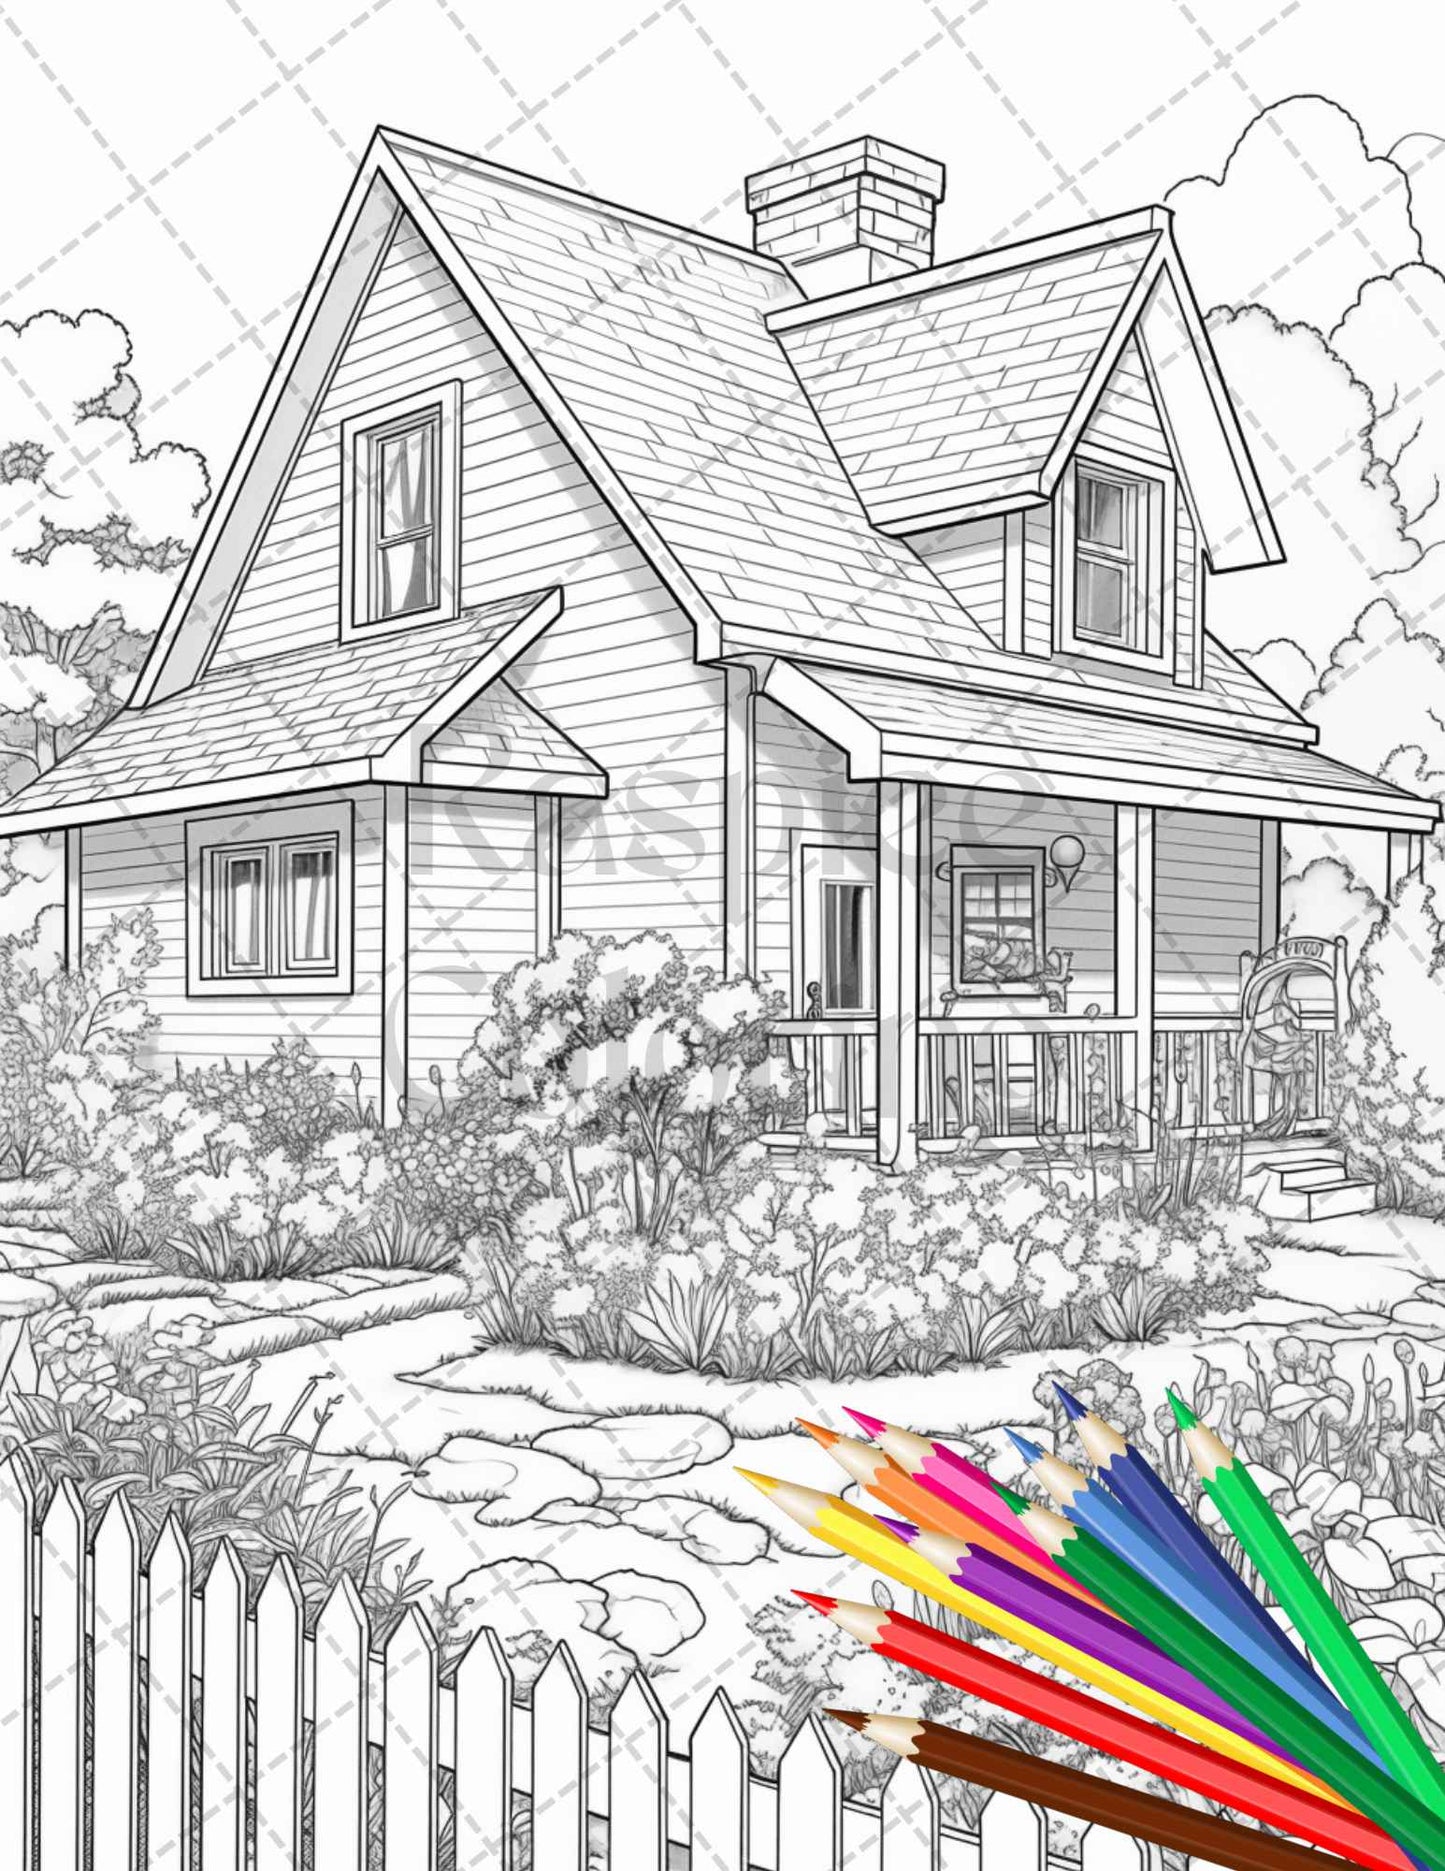 Charming Farmhouse Scenery Grayscale Coloring Pages Printable for Adults, PDF File Instant Download - raspiee